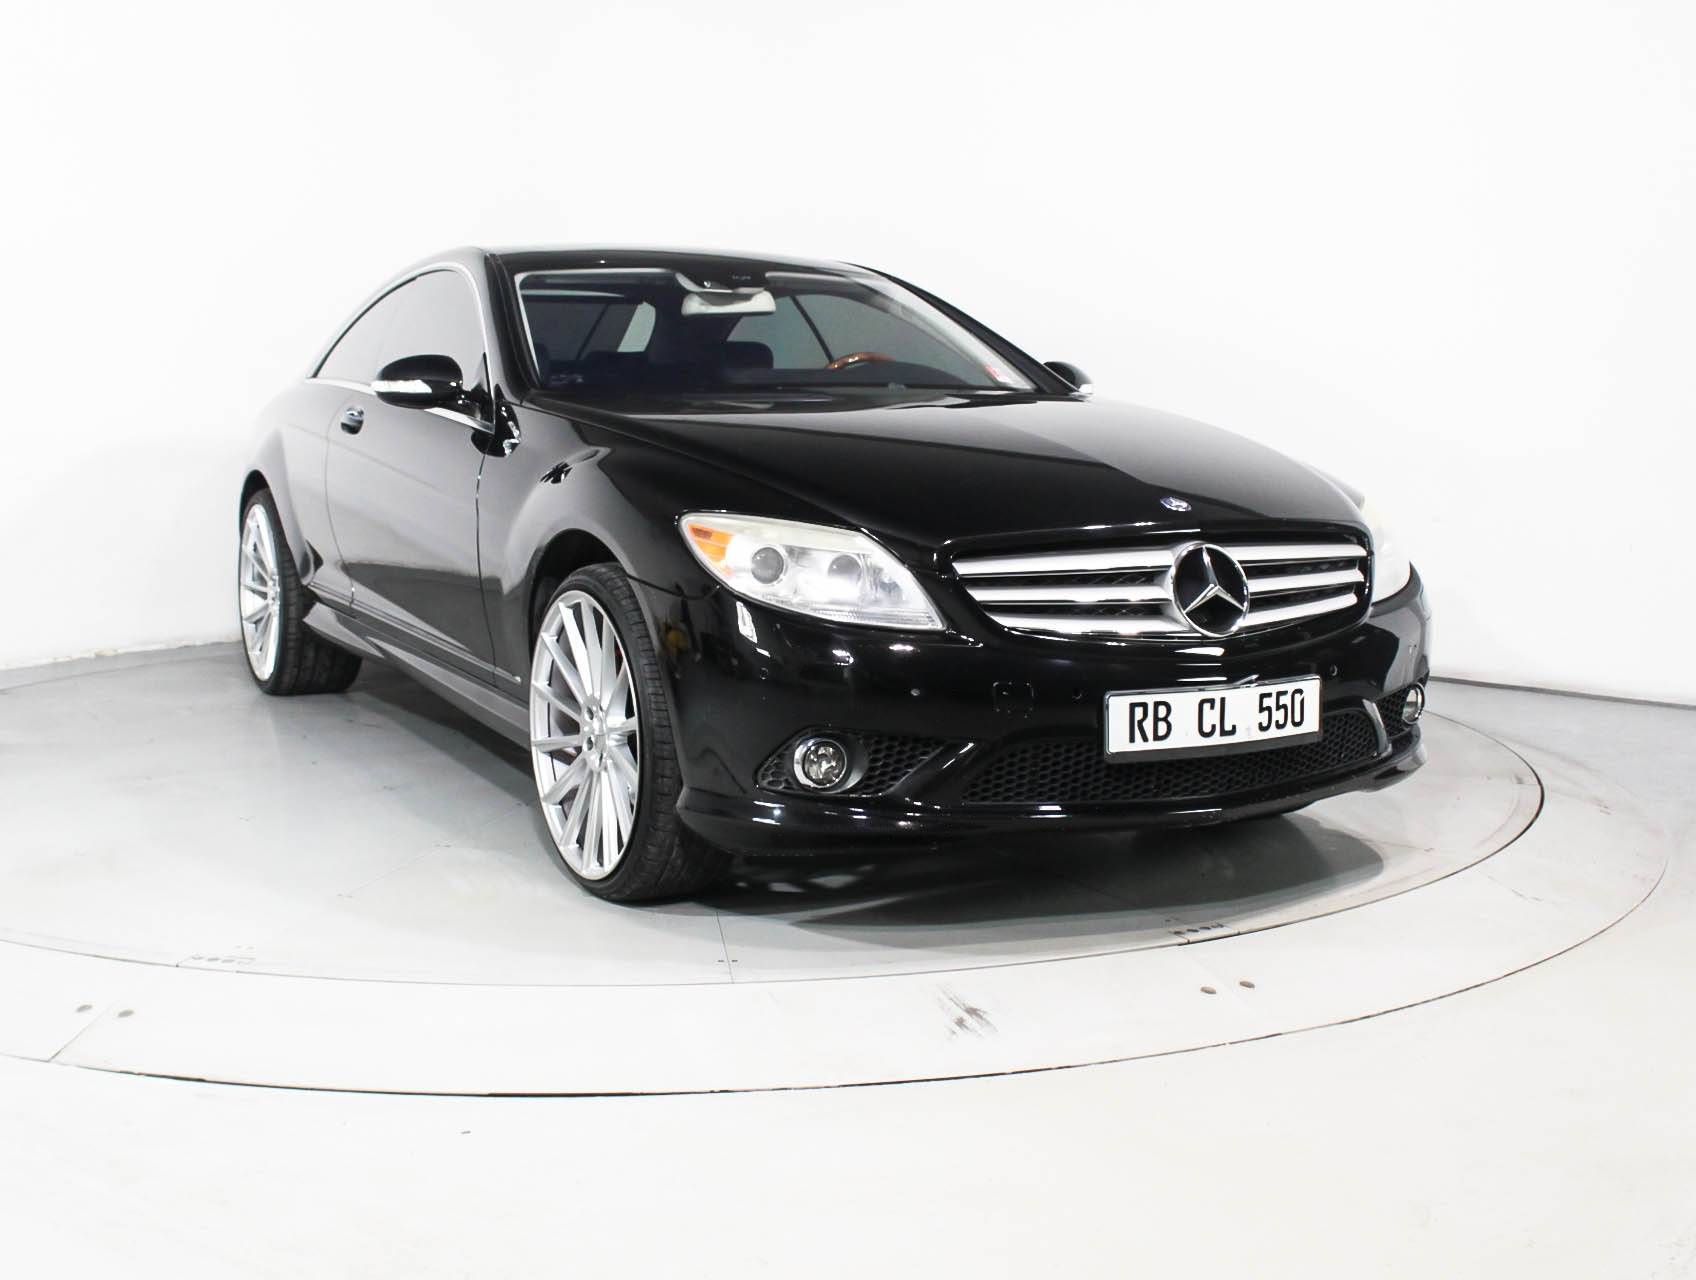 Florida Fine Cars - Used MERCEDES-BENZ CL CLASS 2008 MIAMI CL550